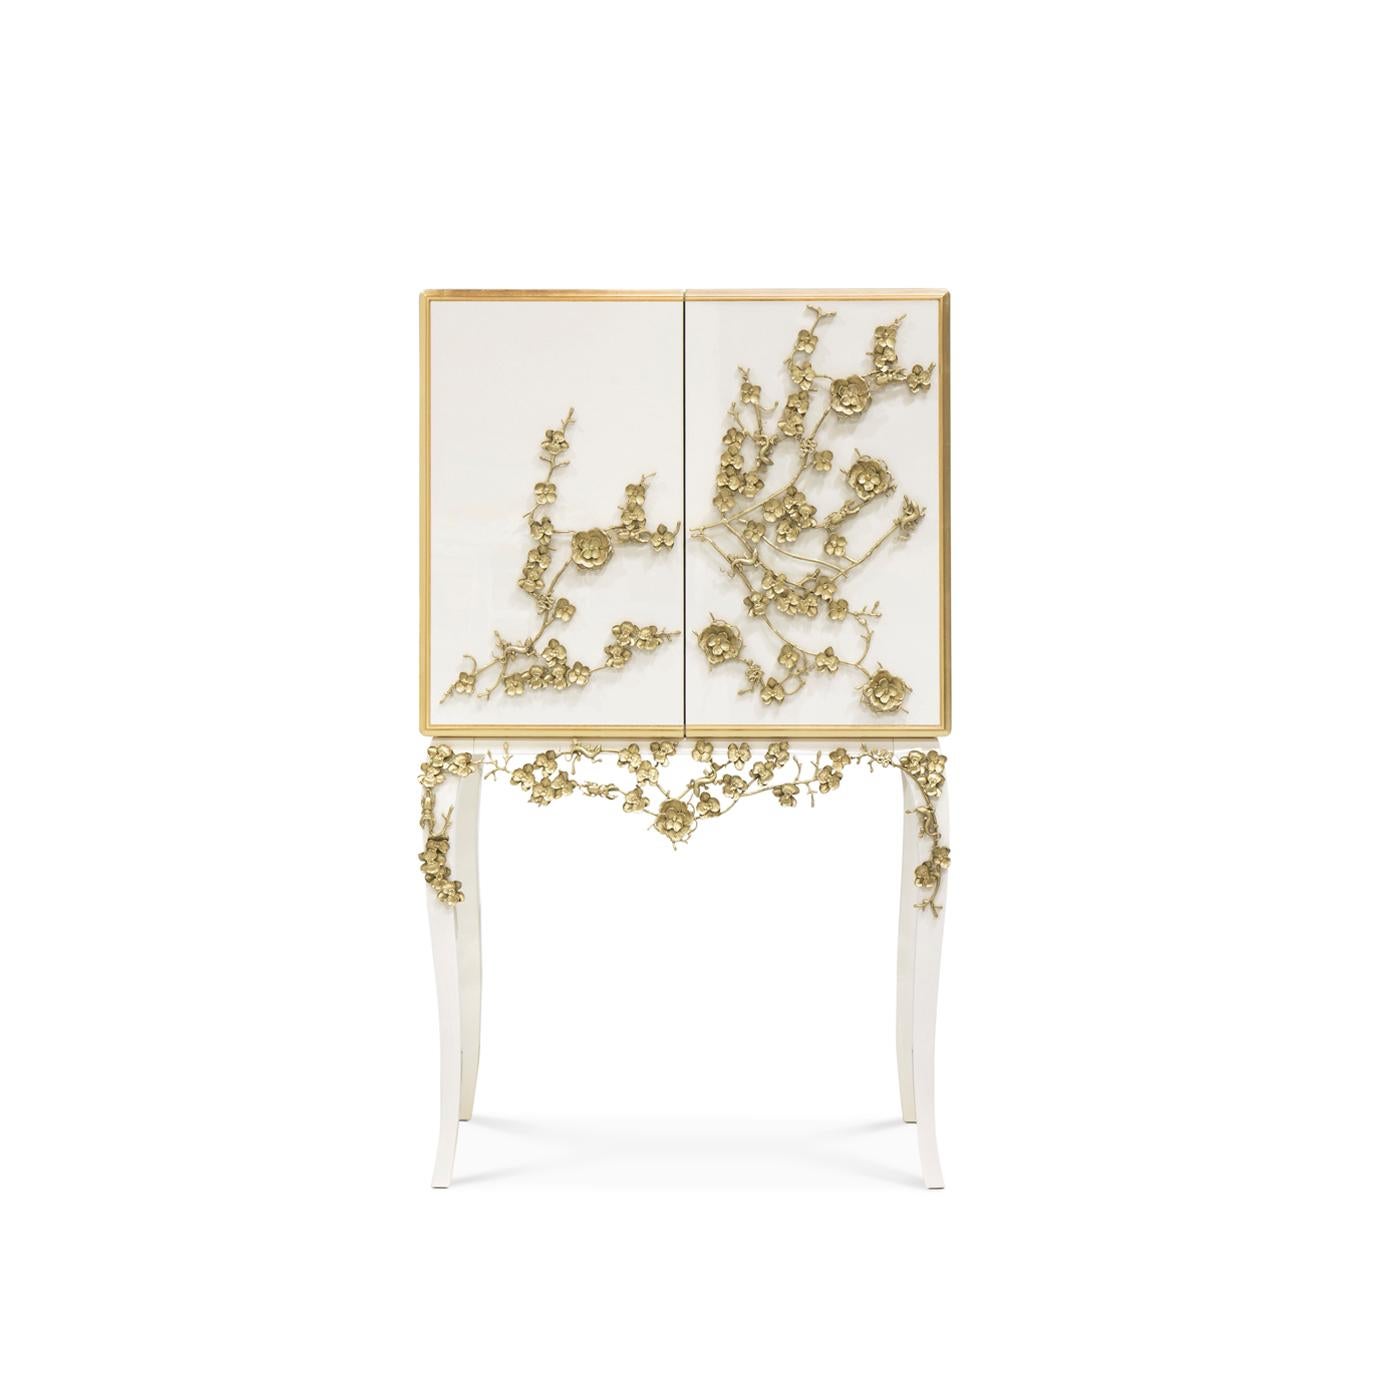 There is a sense of reveal and conceal as KOKET takes a beautiful bar cabinet in high gloss lacquer and adorns it in metal organic lace, revealing a mesmerizing hint of what lies beneath. The chic interior is perfectly designed to store your wine